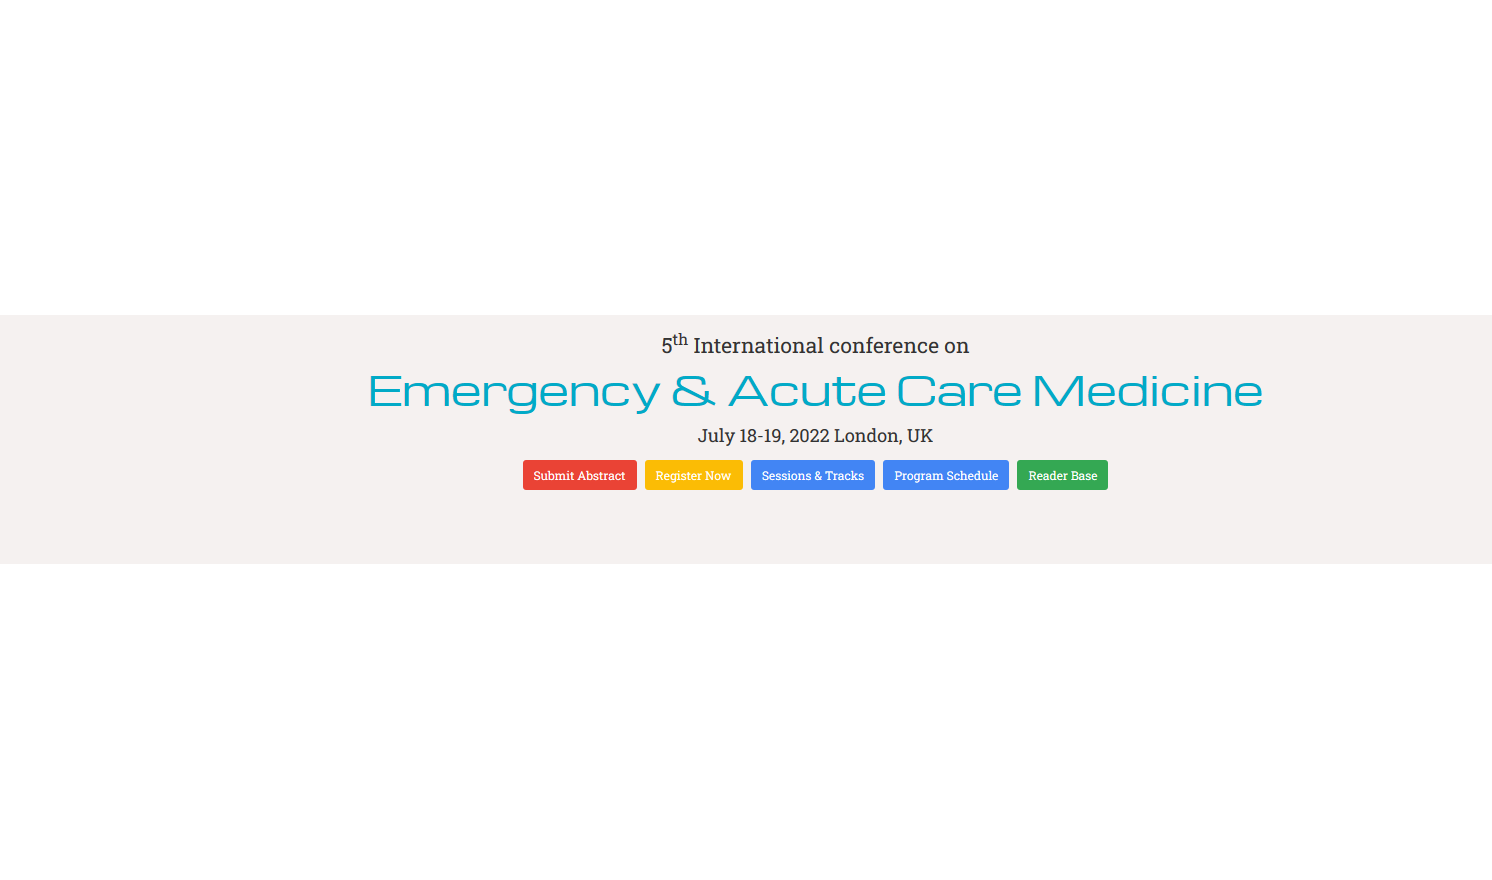 5th International conference on Emergency & Acute Care Medicine 2021